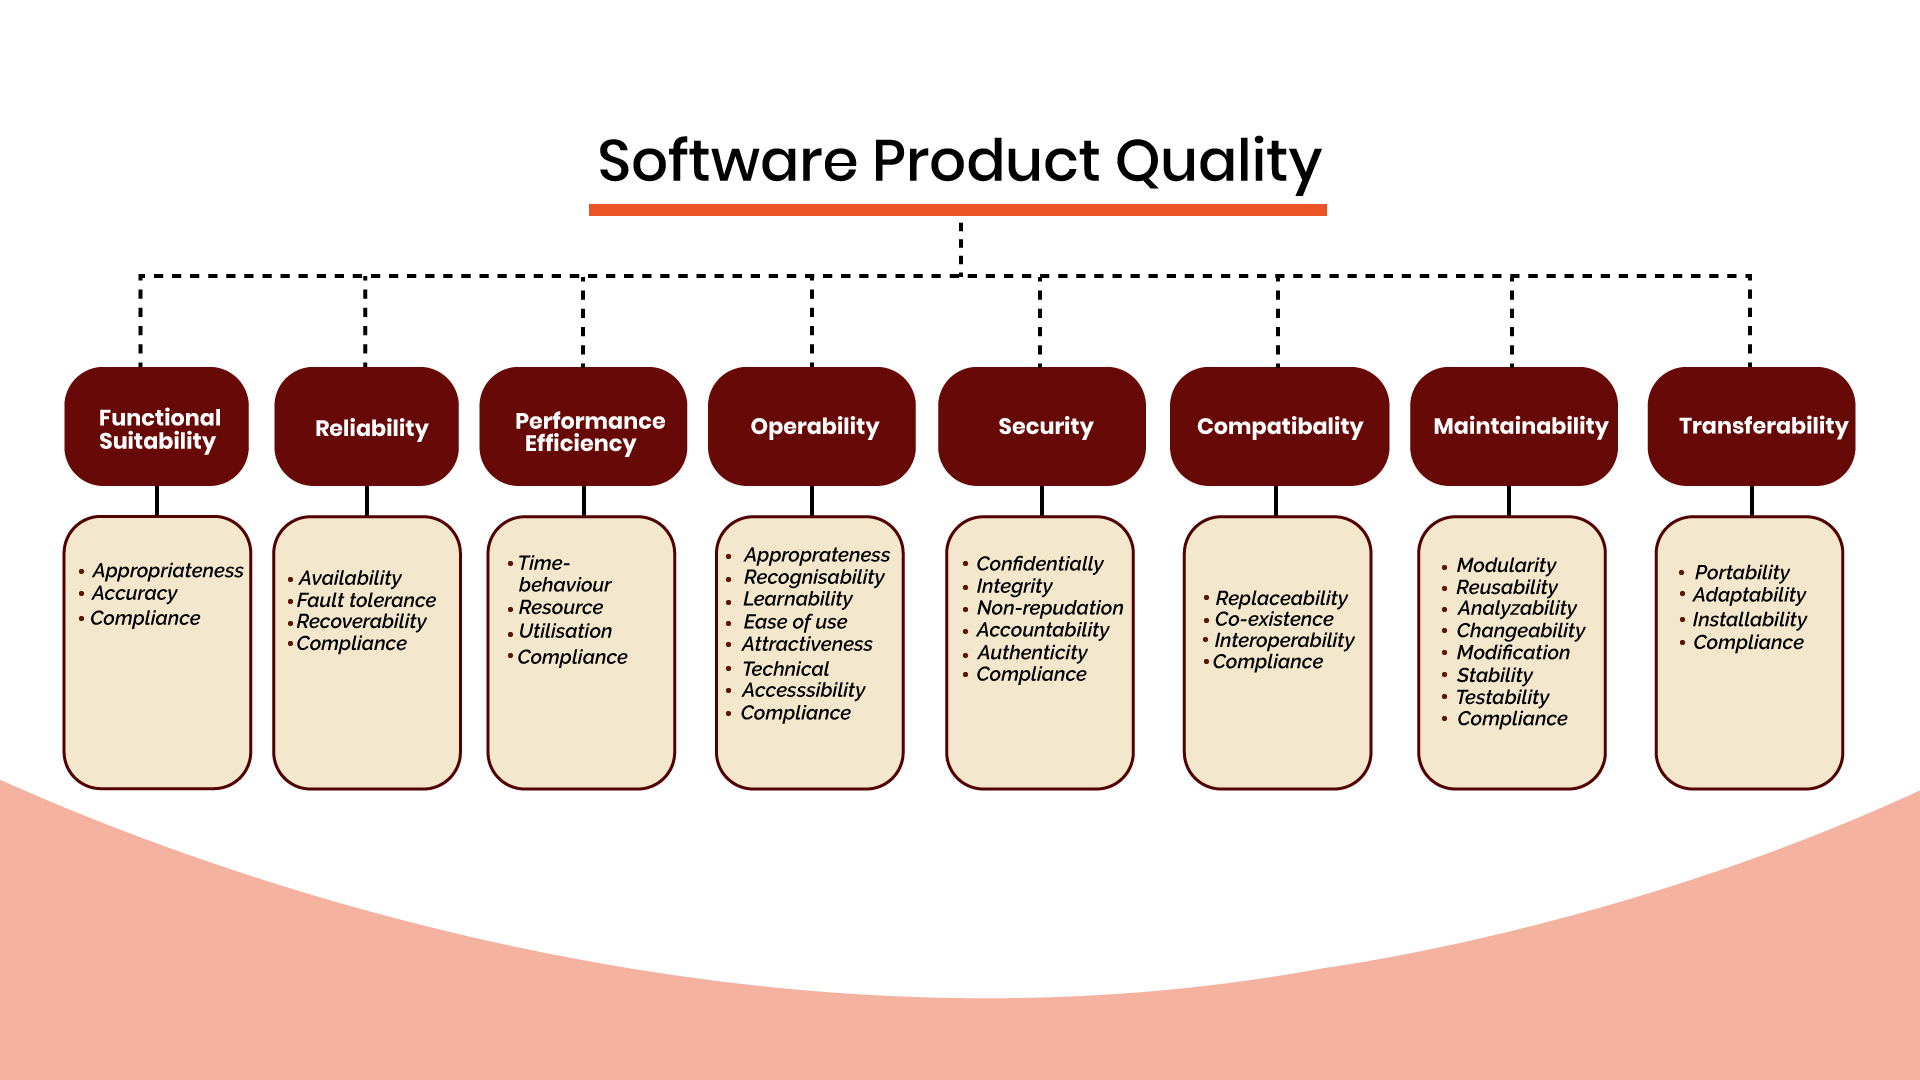 ISO/IEC 25010:2011 Software Quality Model